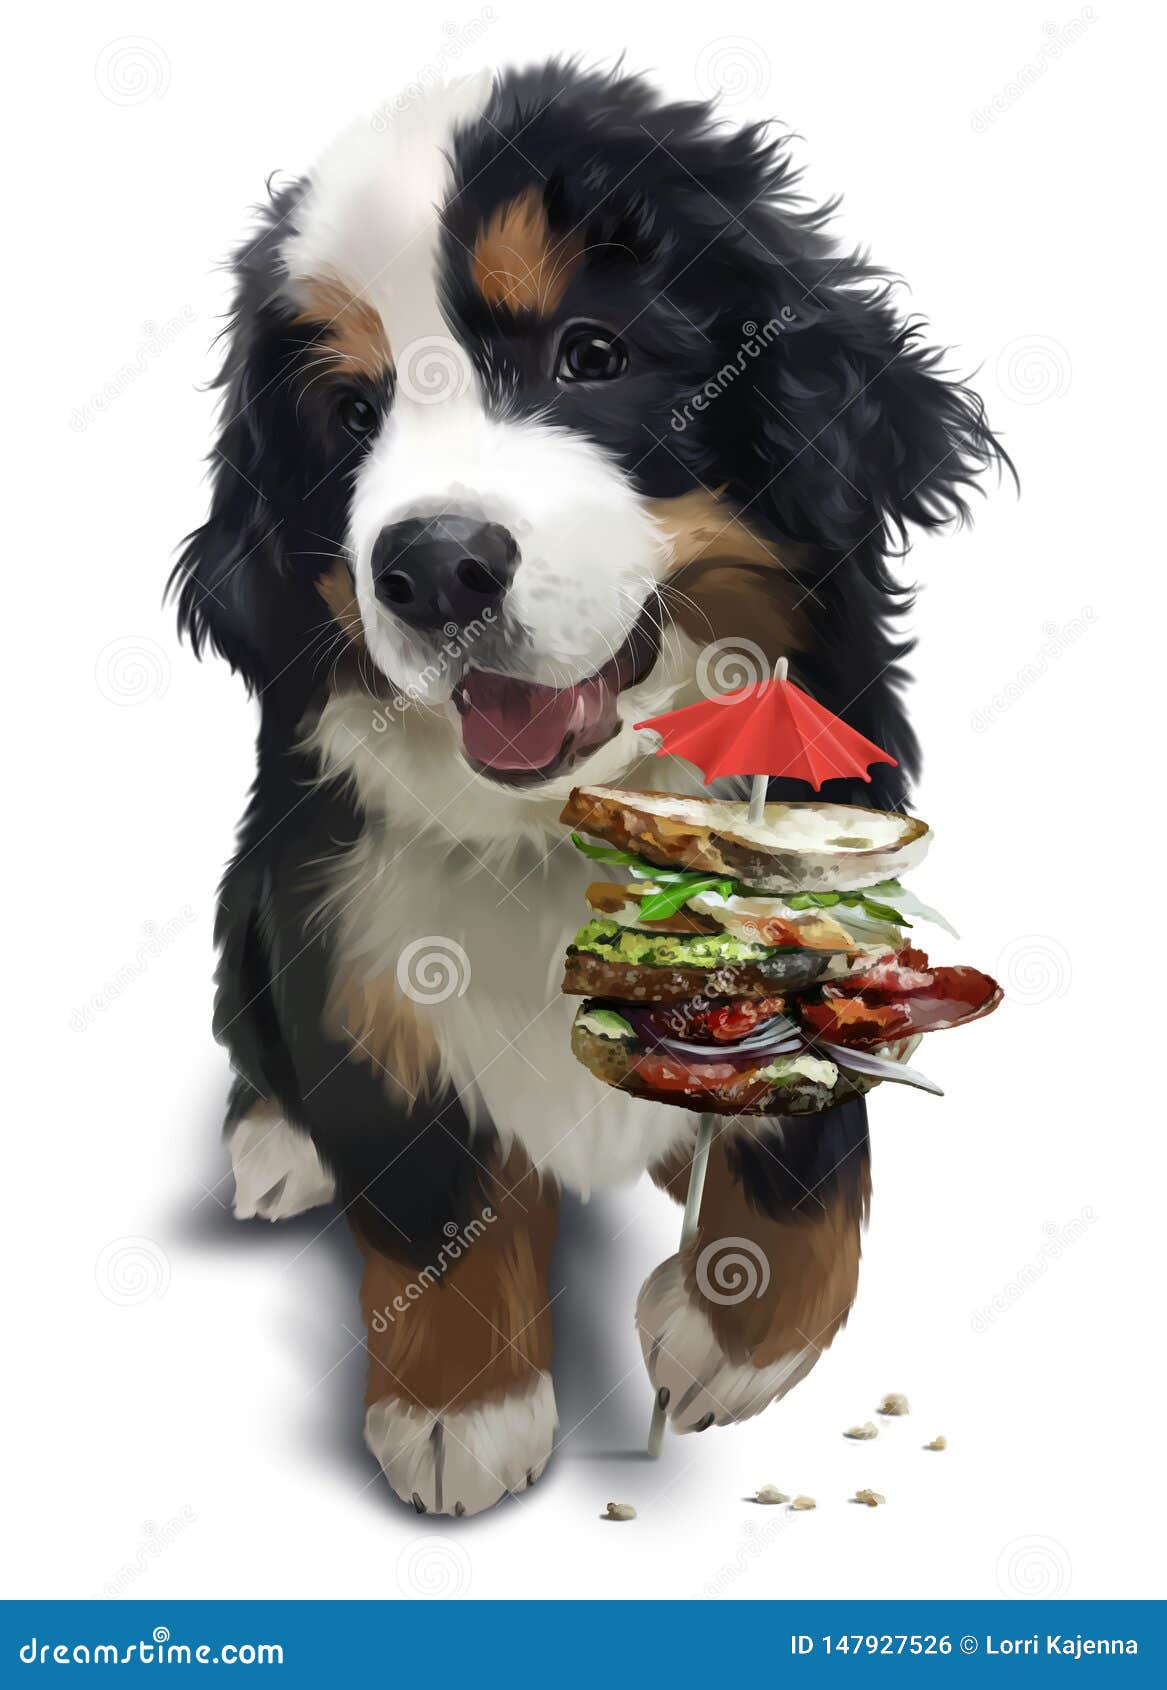 Bernese Mountain Dog And A Big Sandwich Stock Illustration Illustration Of Watercolor Digital 147927526